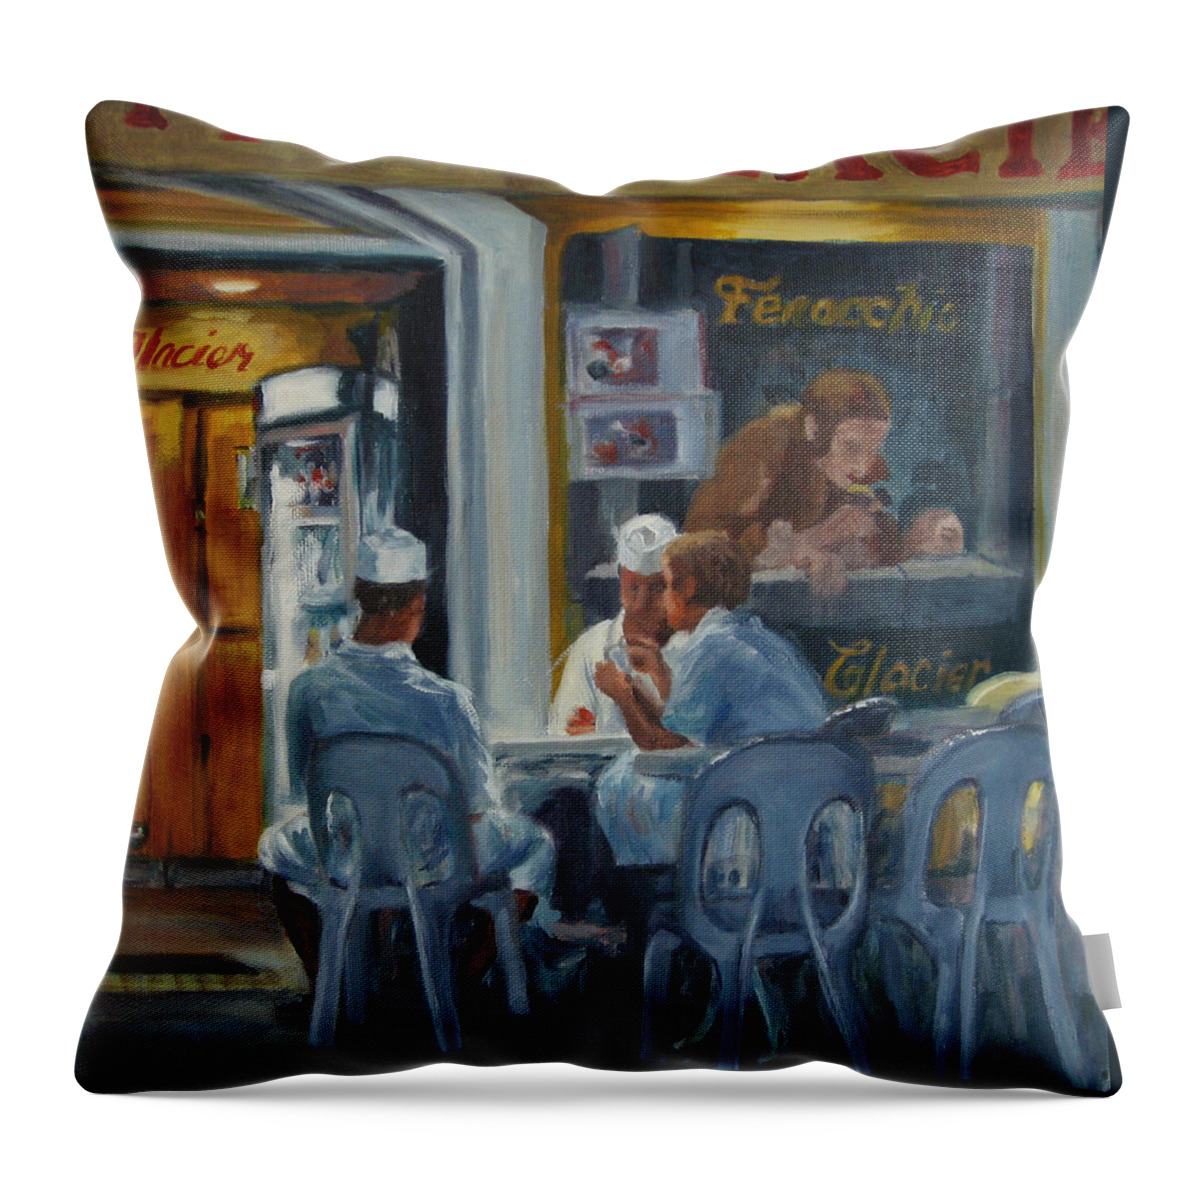 My Art Throw Pillow featuring the painting Final Count by Connie Schaertl